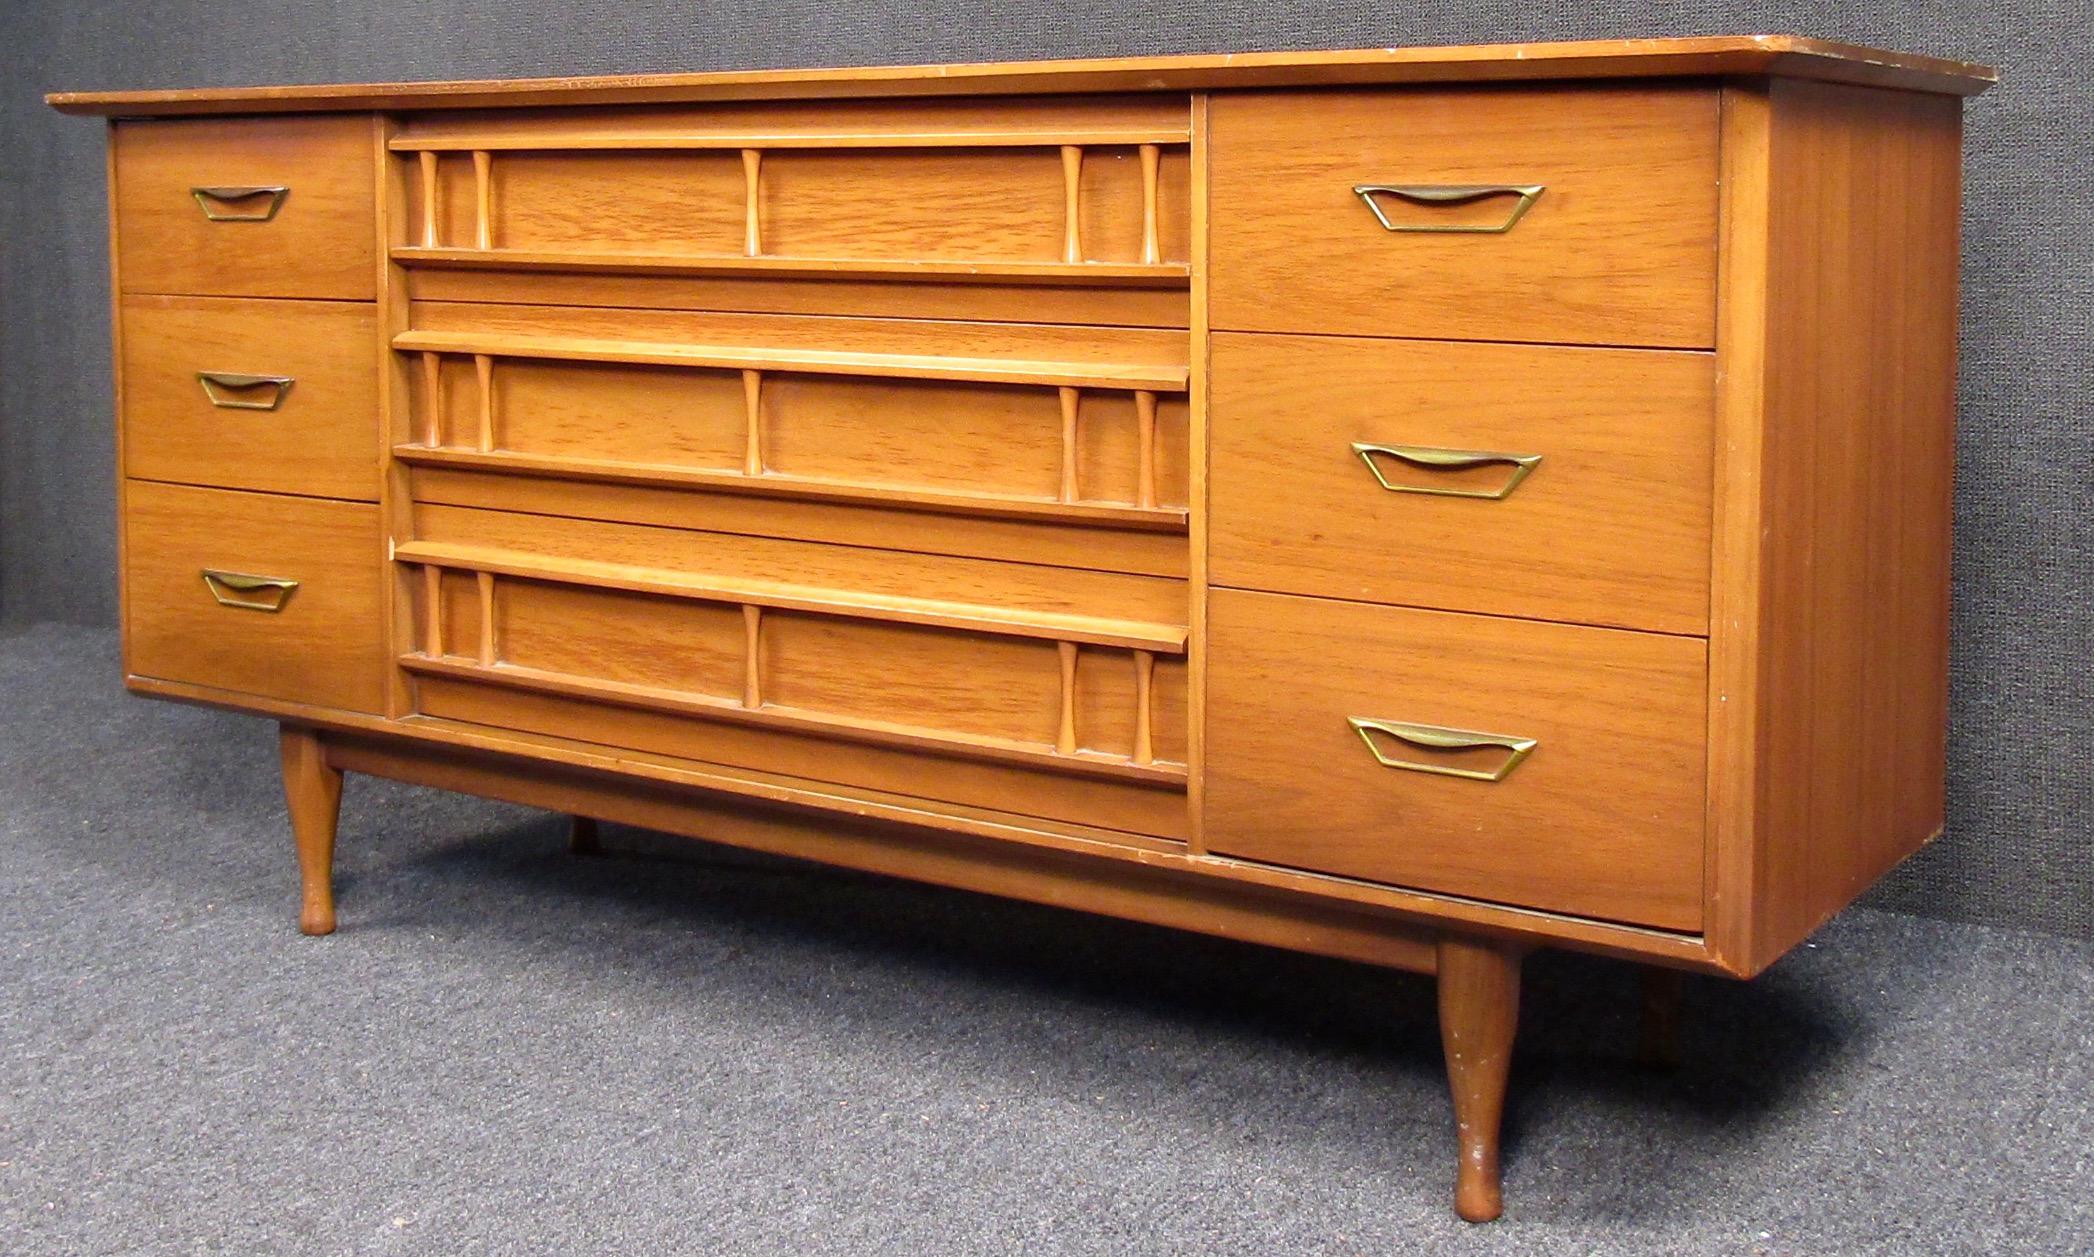 A stunning Mid-Century Modern walnut credenza by Forward furniture Unagusta. A unique 9 drawer dresser with intricate detail and tapered legs. Perfect for any setting. 

Confirm pickup location (NY/NJ).